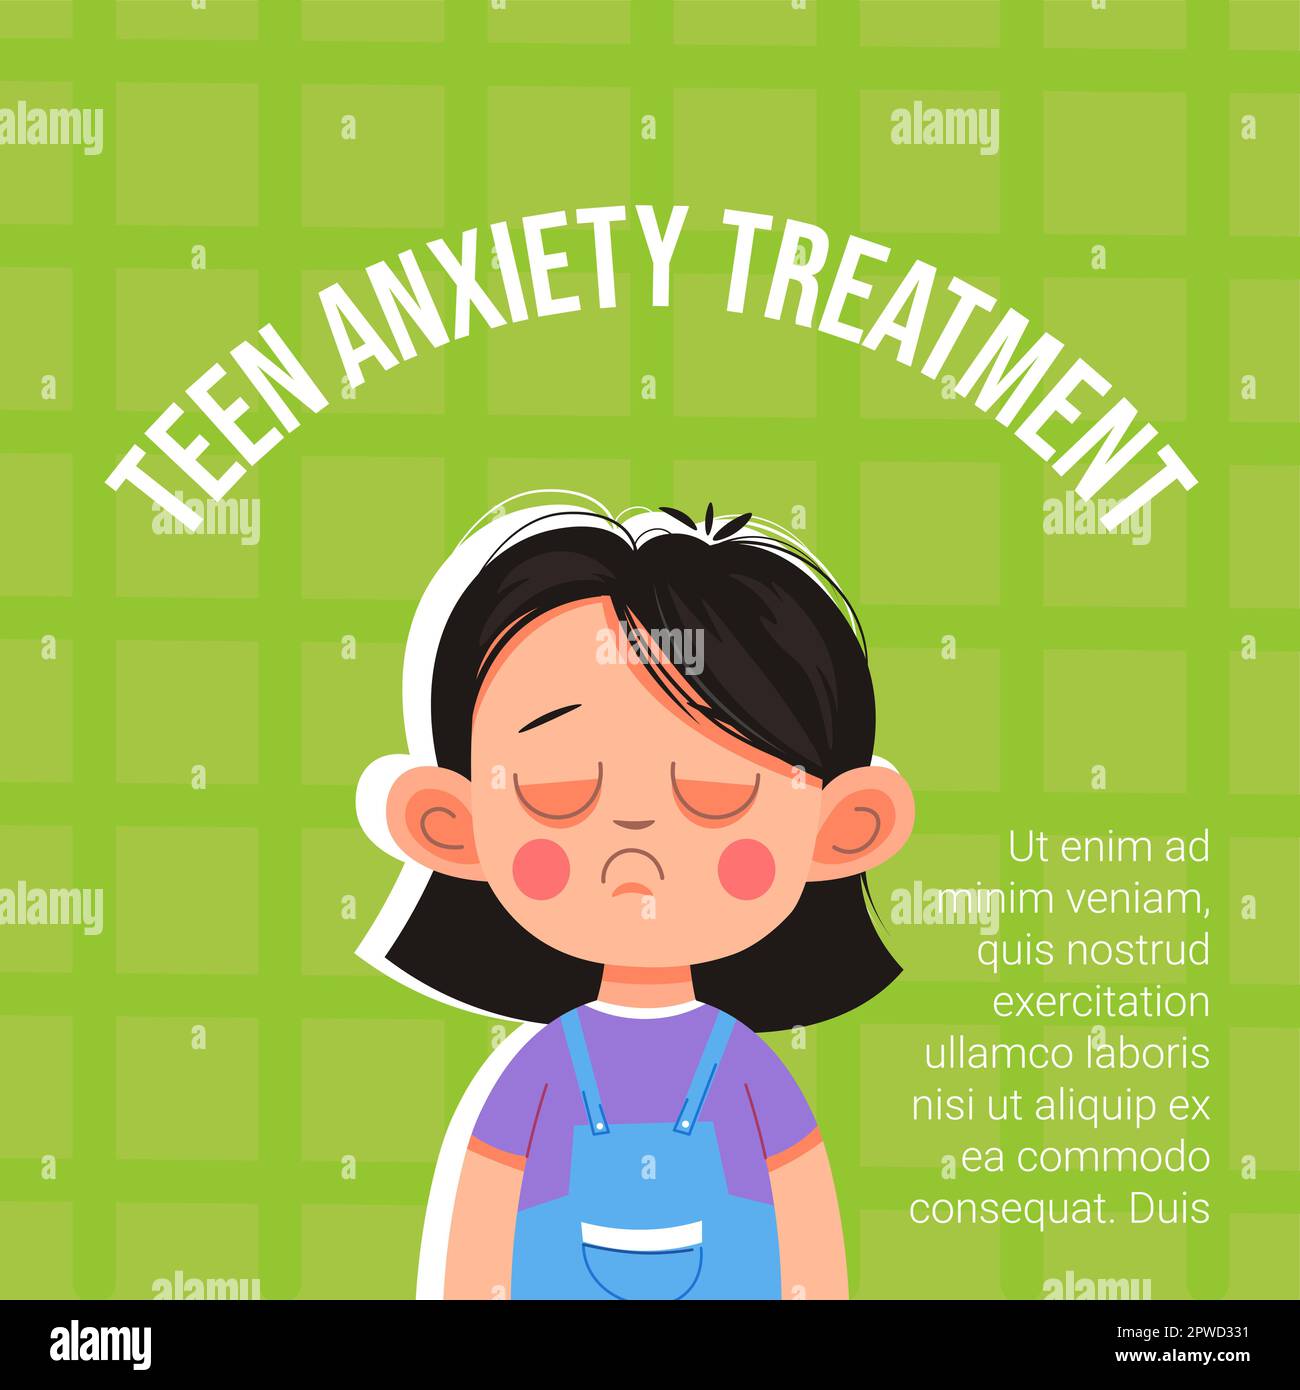 Teen anxiety treatment, psychological help for kid Stock Vector